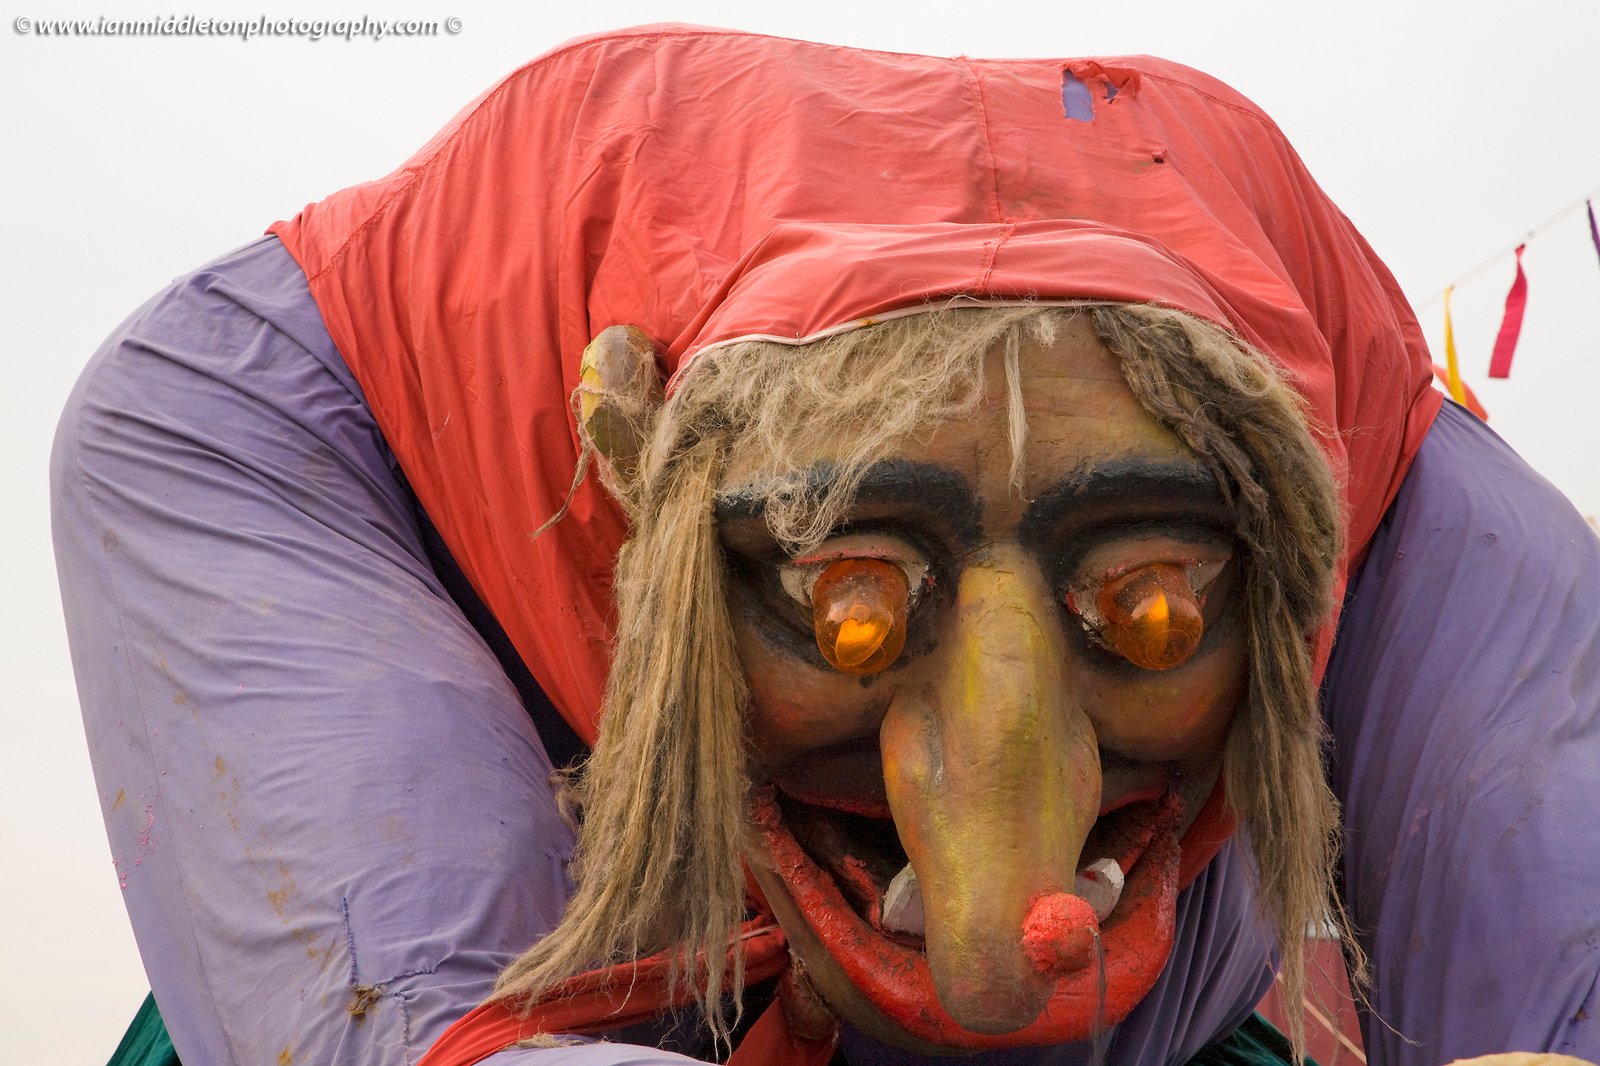 The annual Pust carnival in Cerknica, Slovenia 2009 ( A traditional celebration where people dress up to scare off the winter )